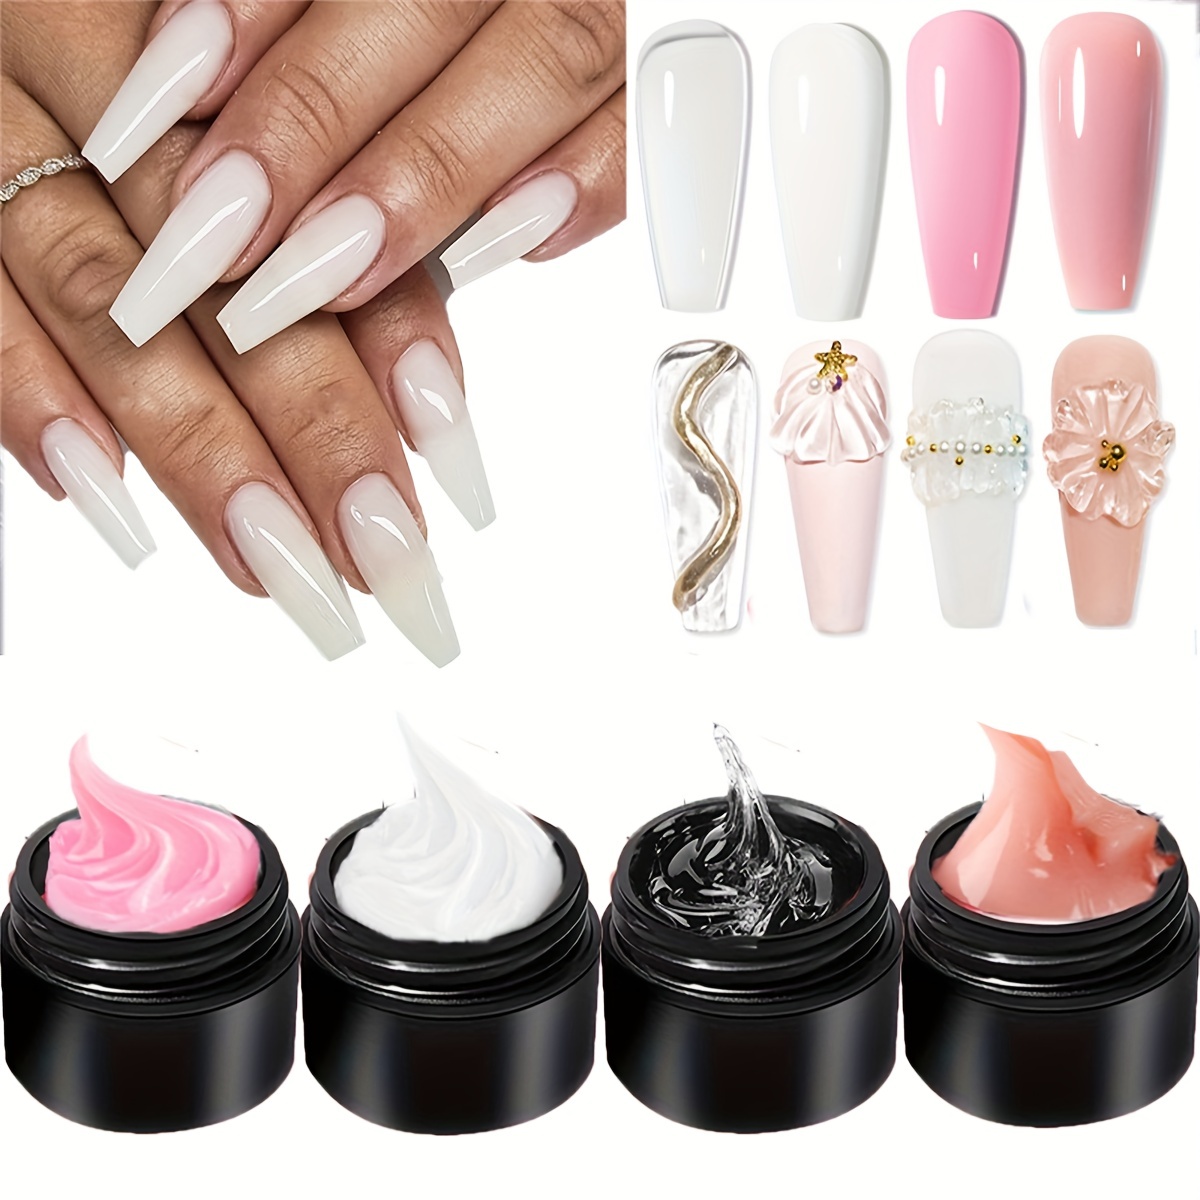 Buy Secret Lives® acrylic press on nails artificial designer fake nails  extension translucent nude with pearls glitter & 3D bow 24 pieces set with  kit Online at Low Prices in India -